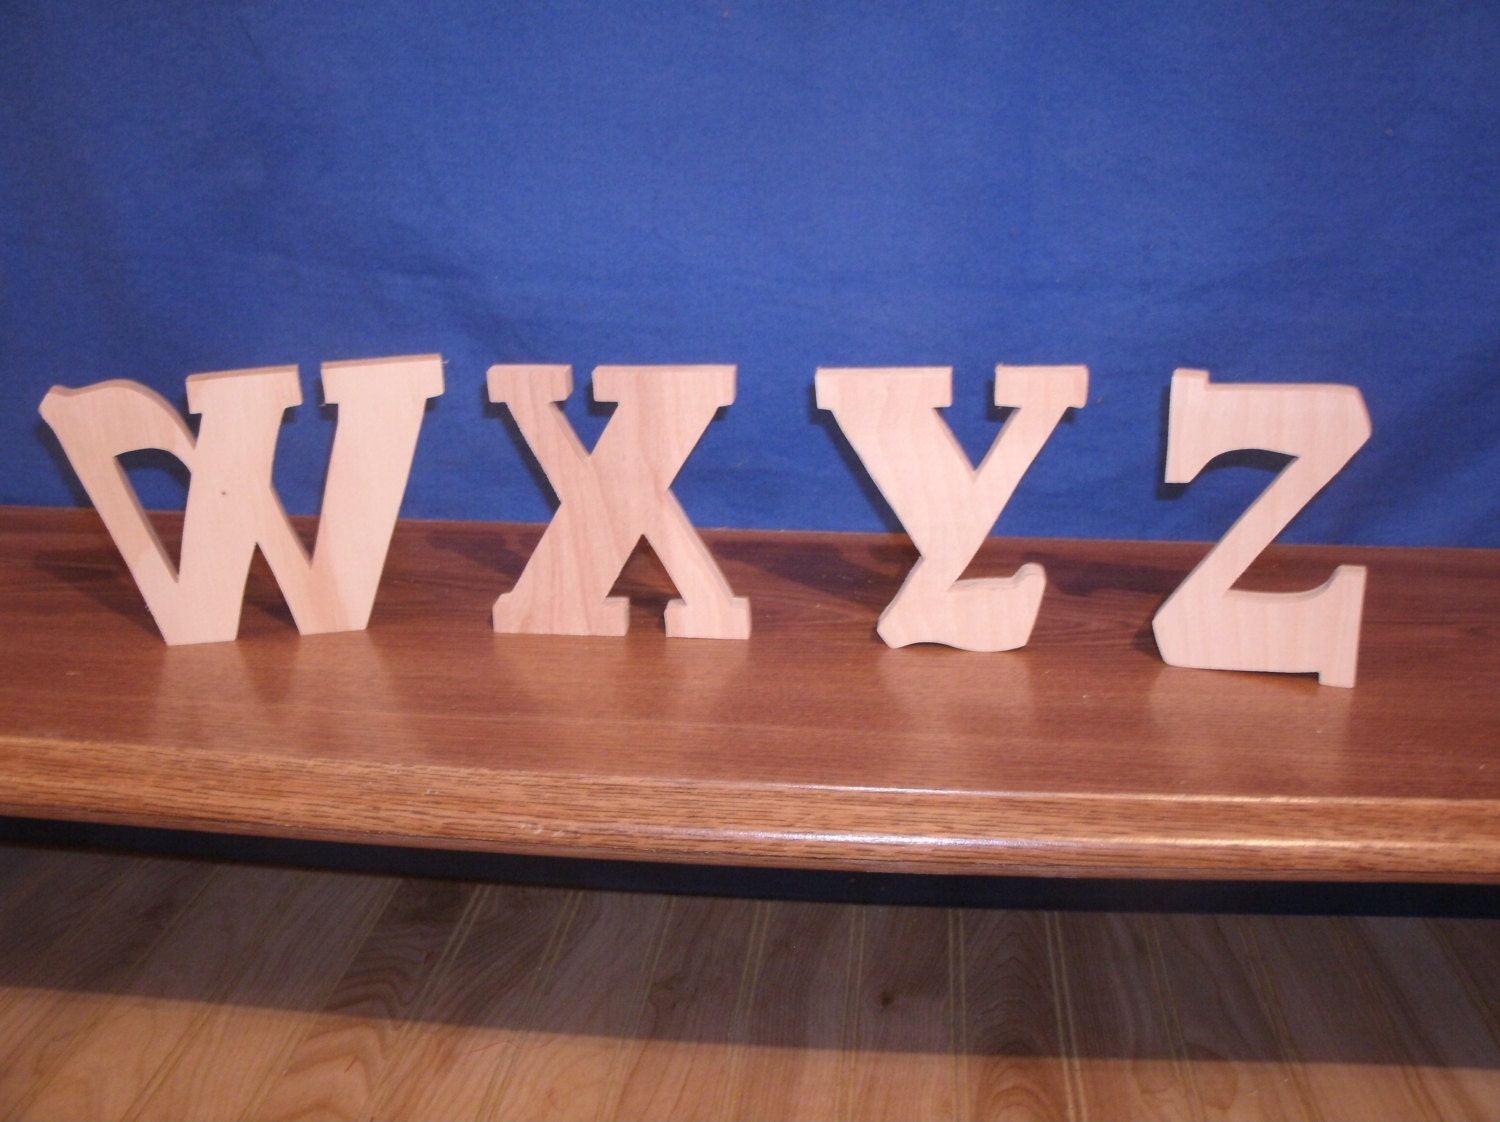 Wood Letters - 3 1/2 Inch Double Layer Letters or Numbers